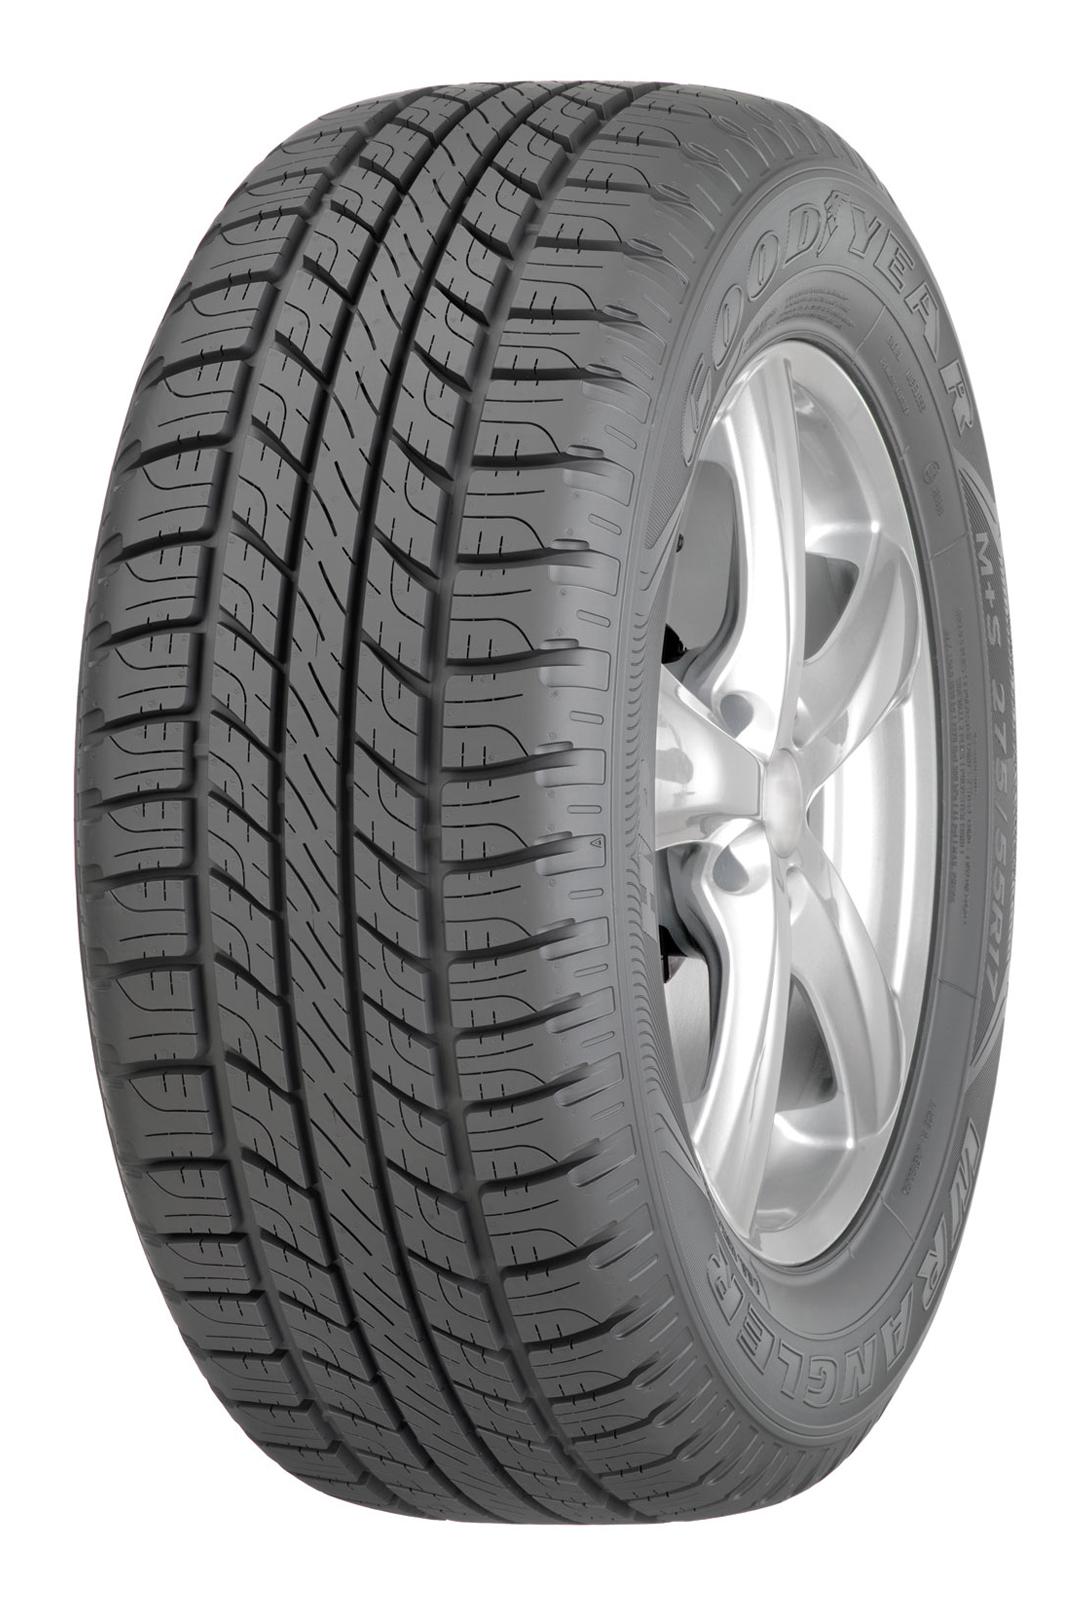 Goodyear WRANGLER HP ALL WEATHER 235/70 R16 WRL HP ALL WEATHER 106H FP M+S